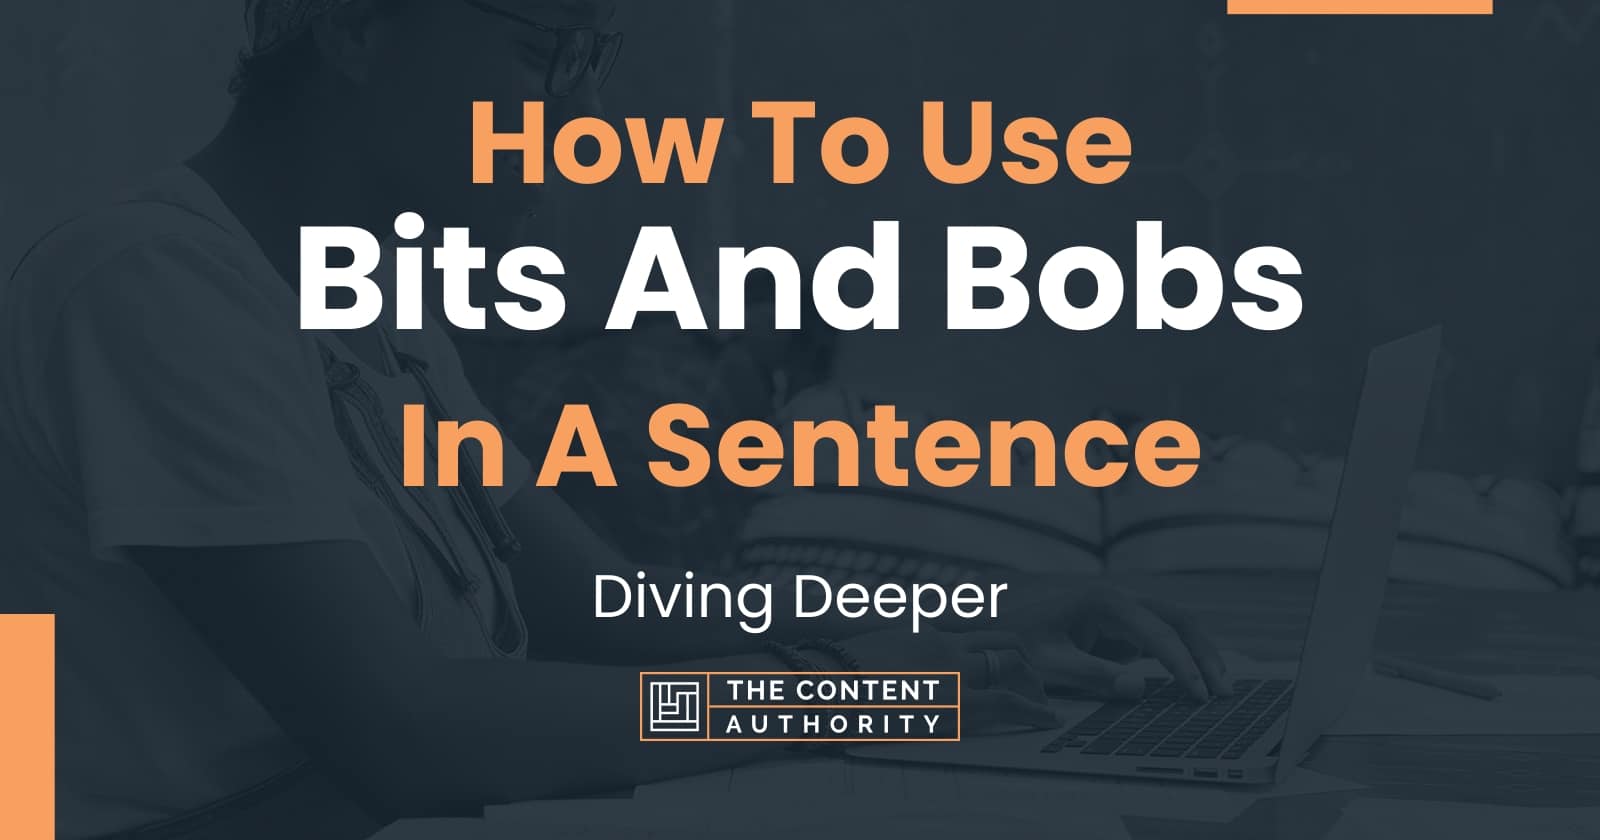 How To Use Bits And Bobs In A Sentence 